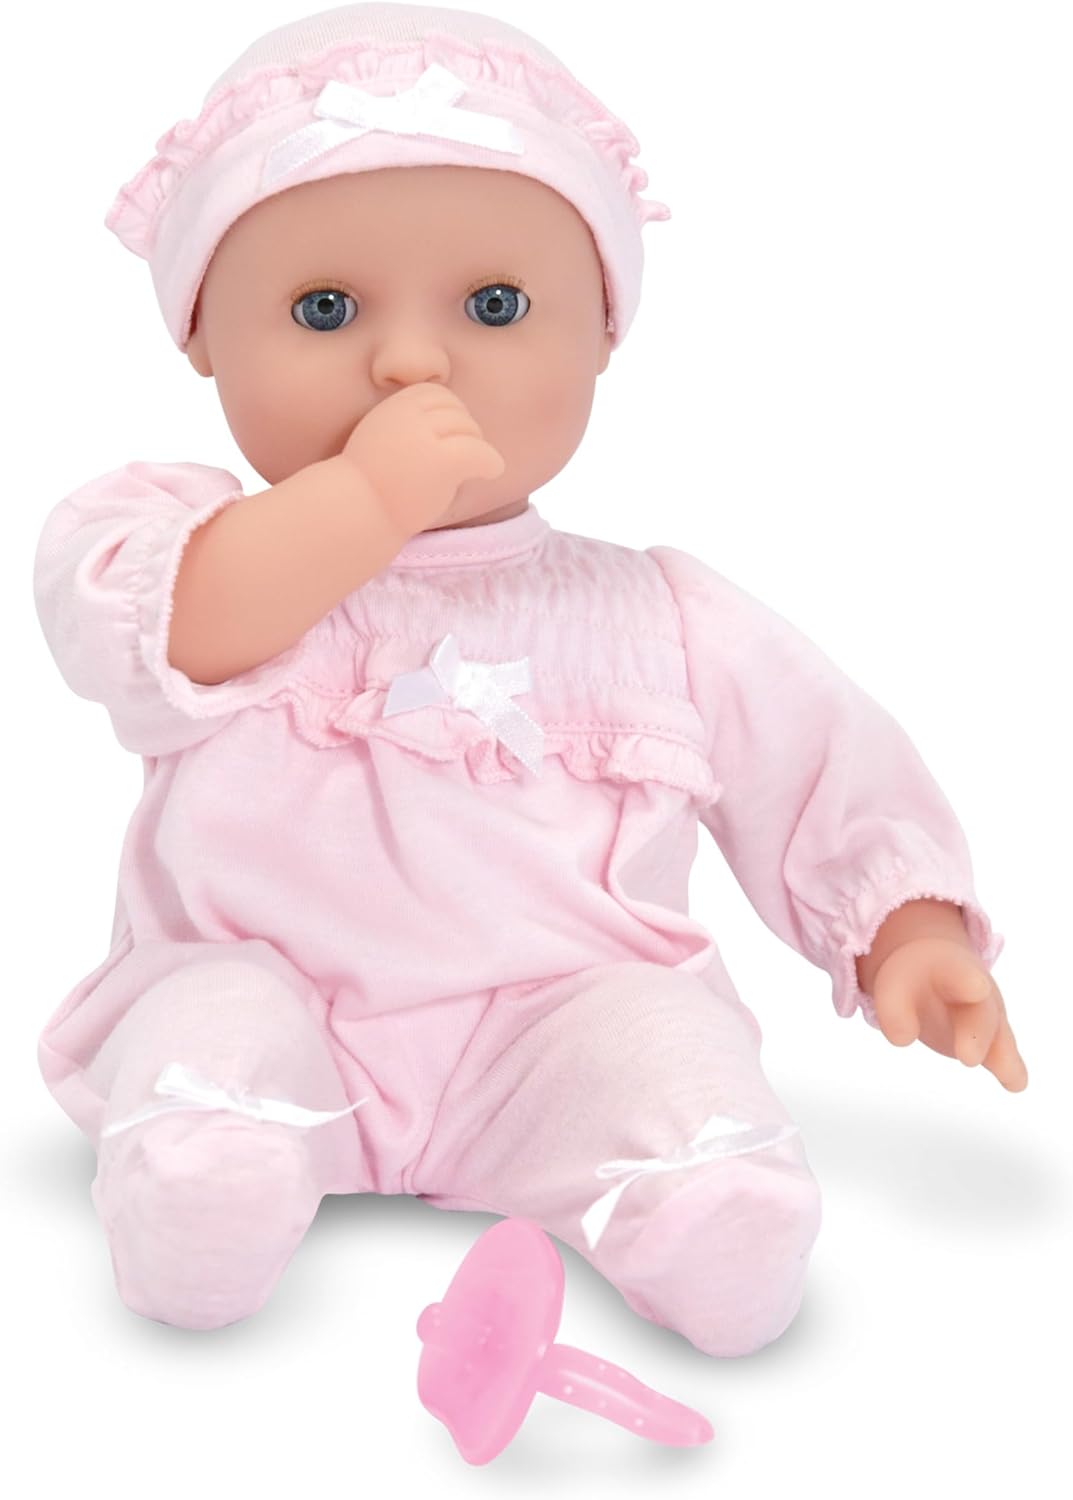 Melissa & Doug Mine to Love Jenna 12-Inch Soft Body Baby Doll With Romper and Hat - image 1 of 4